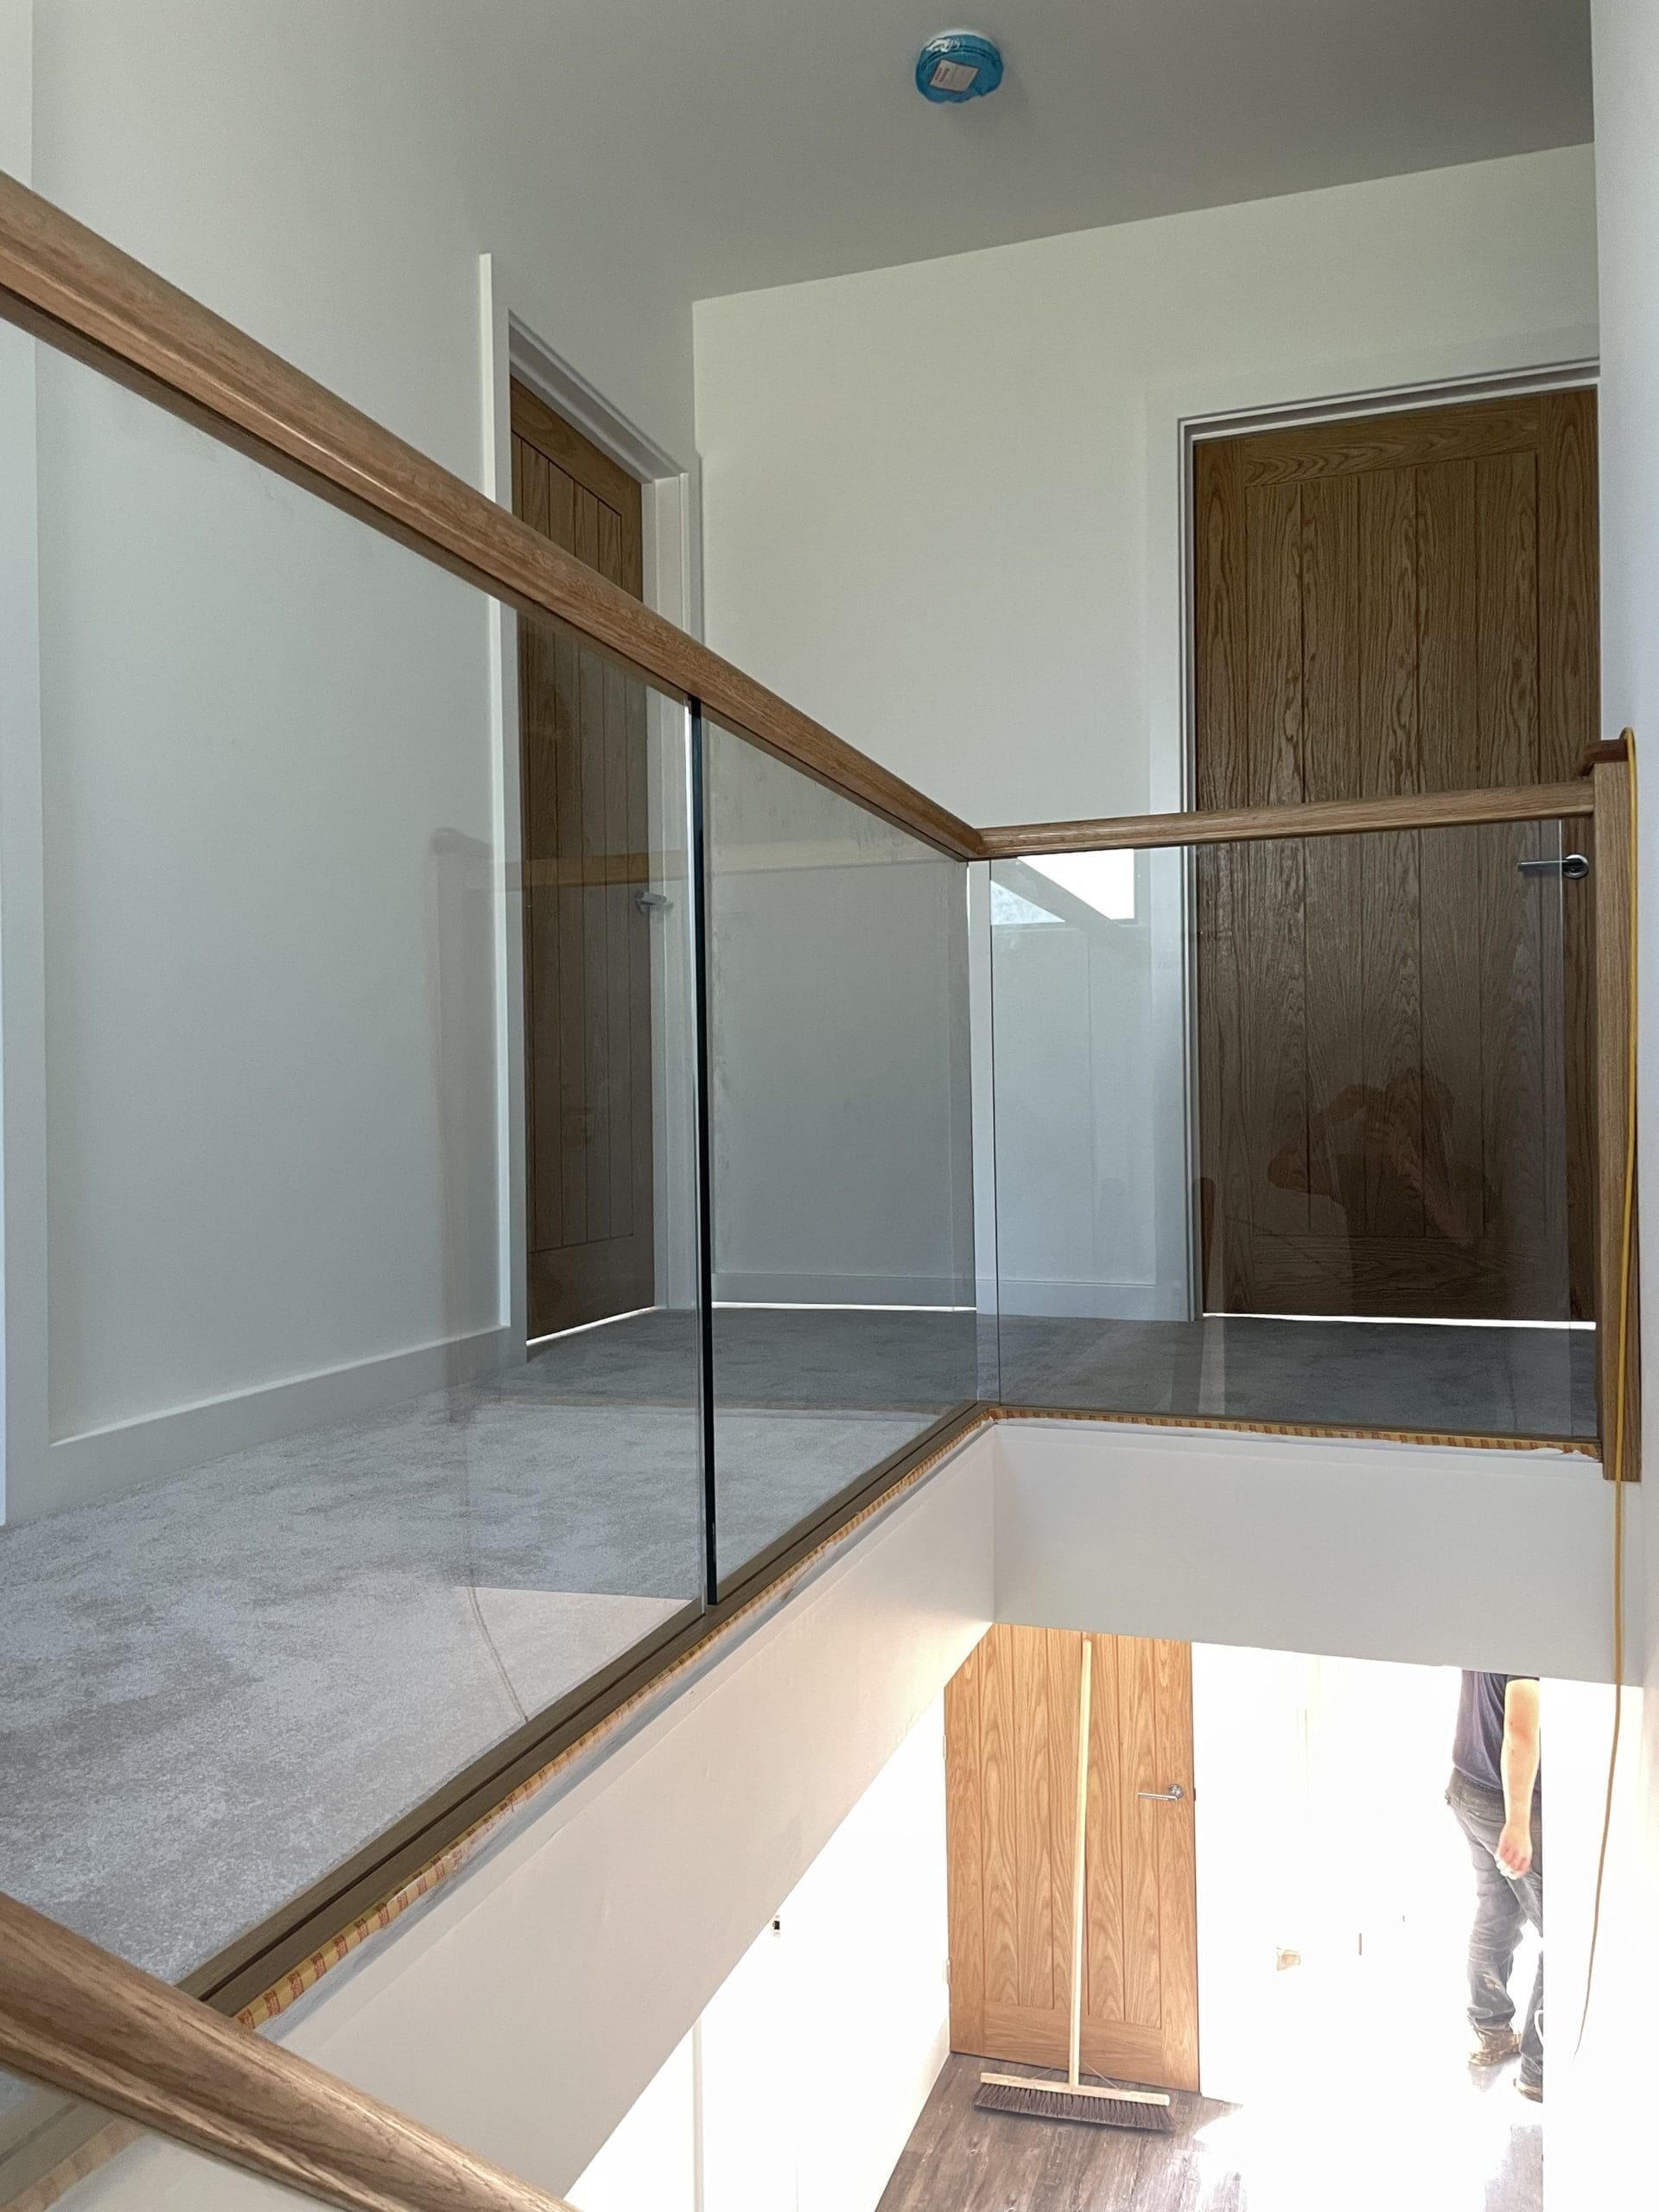 Oak timber staircase with glass balustrade infill panels